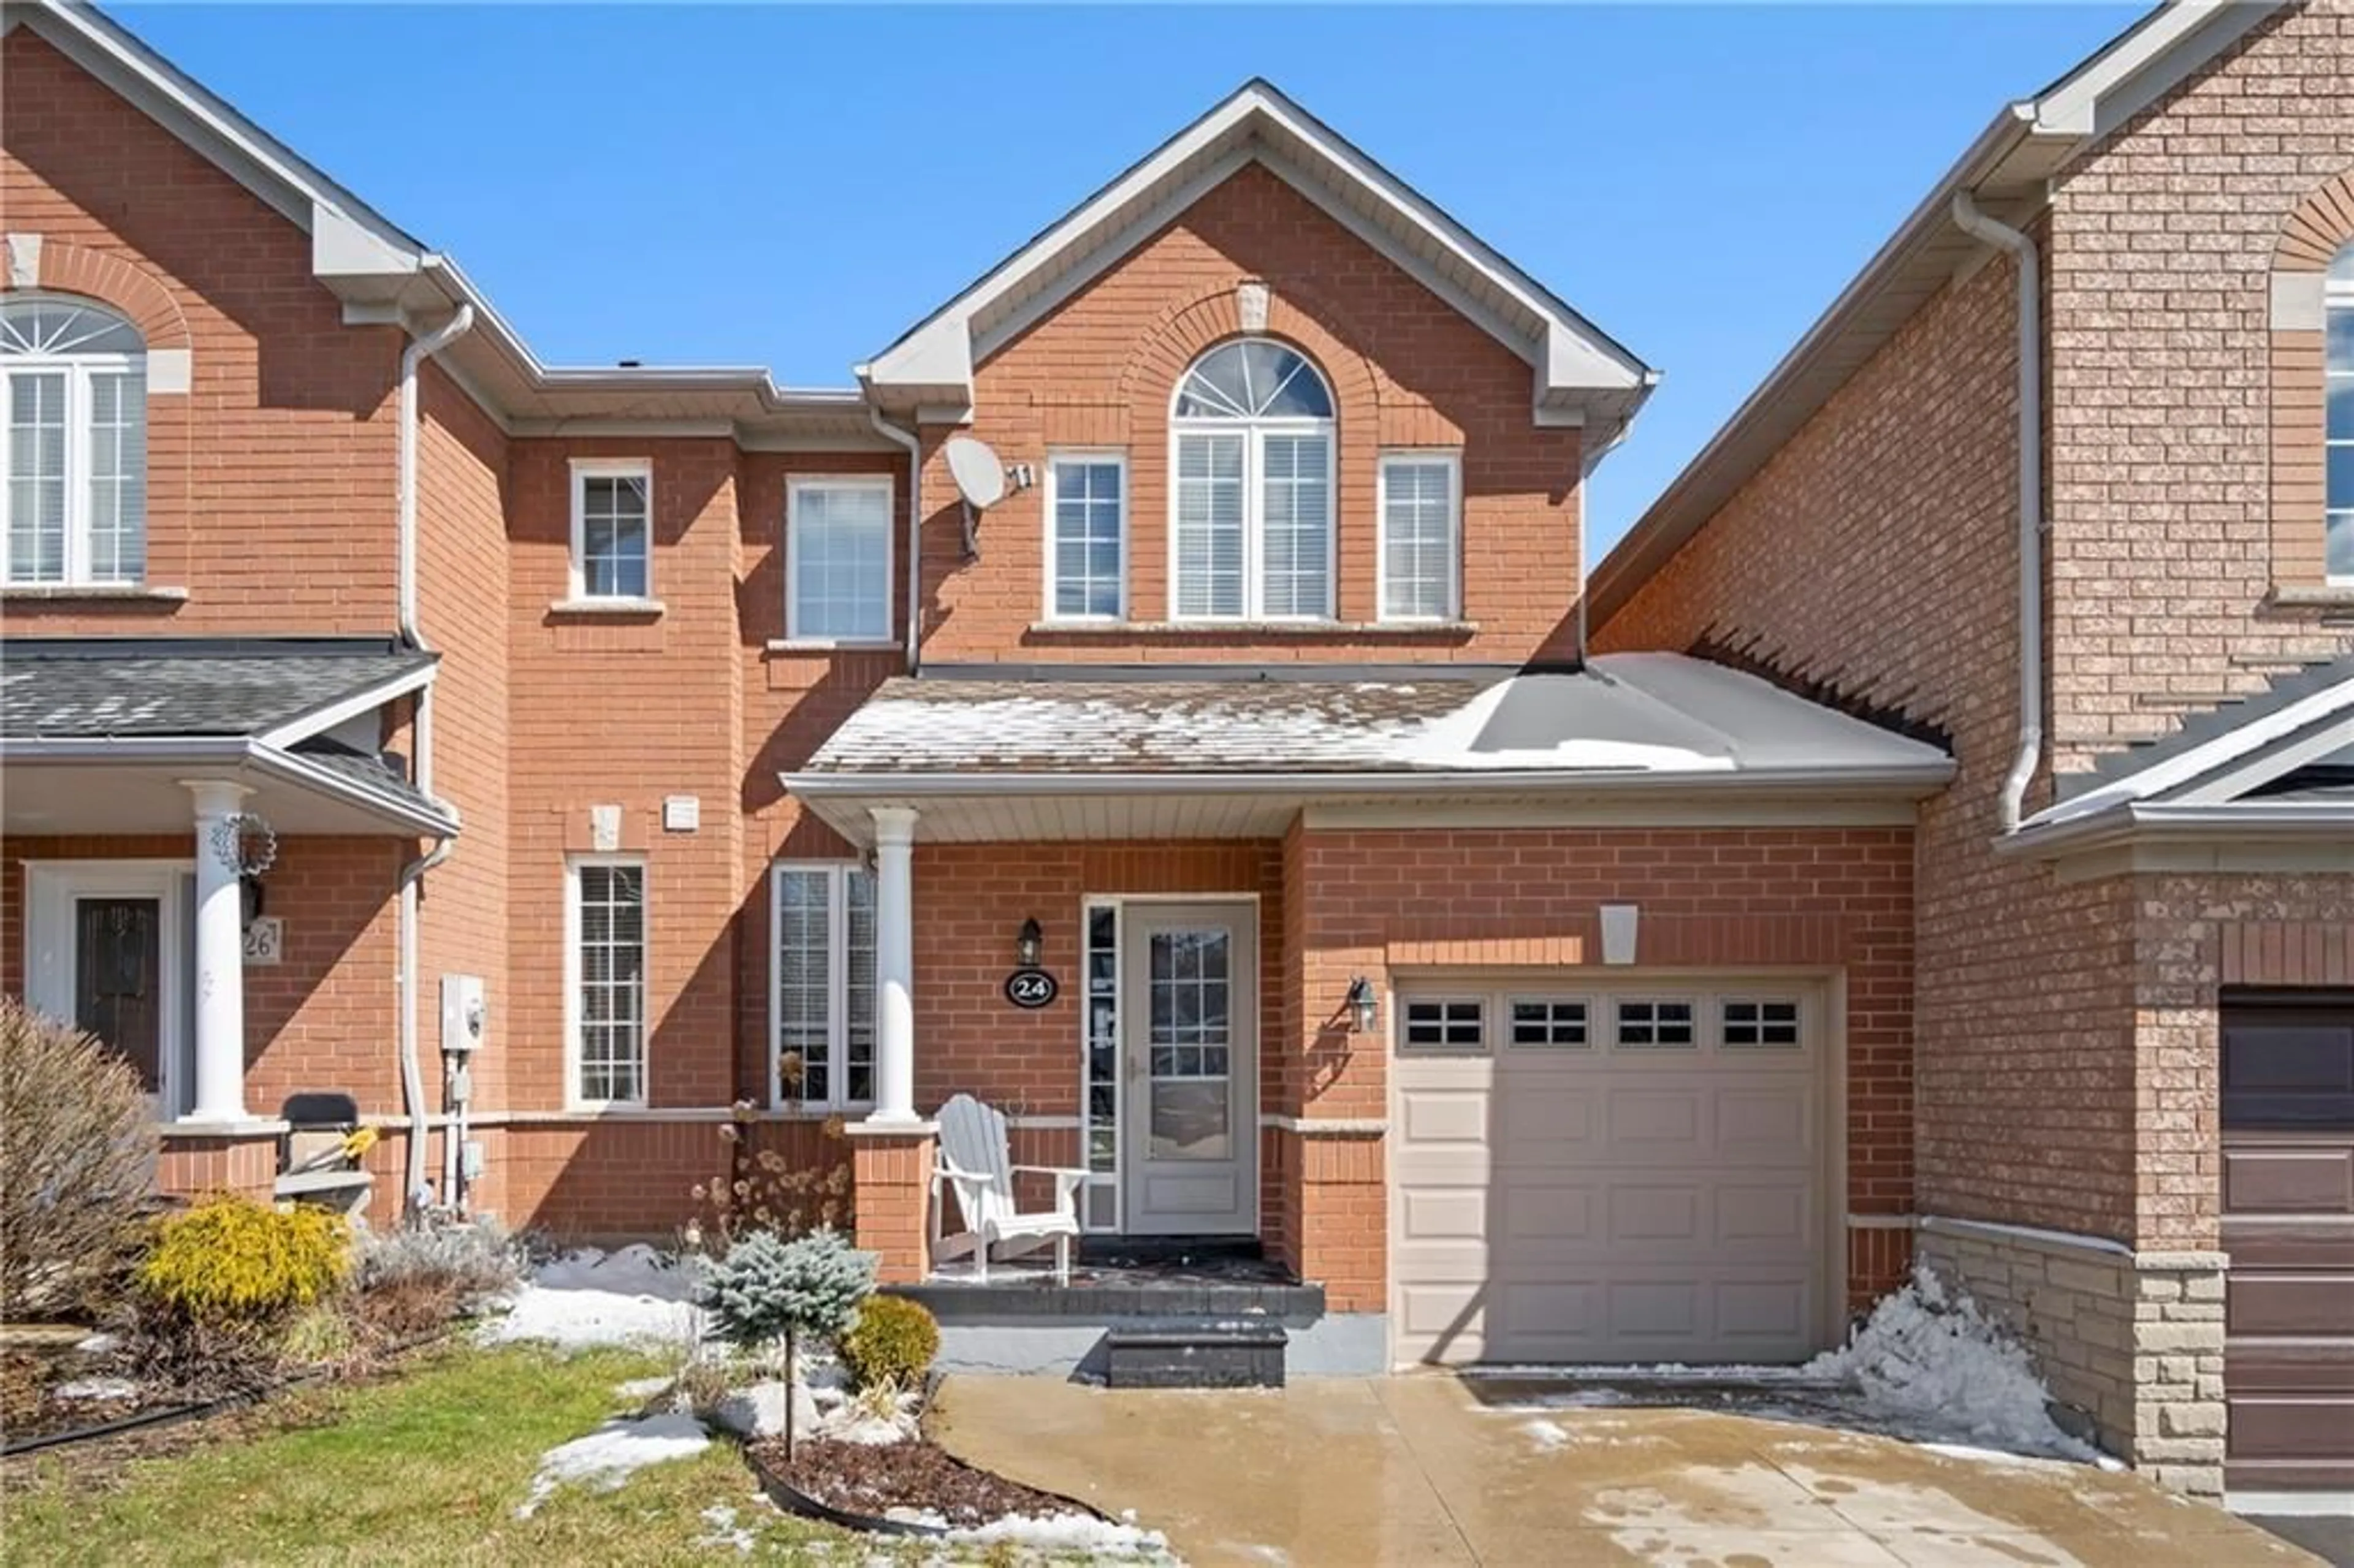 Home with brick exterior material for 24 MOORE Cres, Ancaster Ontario L9G 4Z5